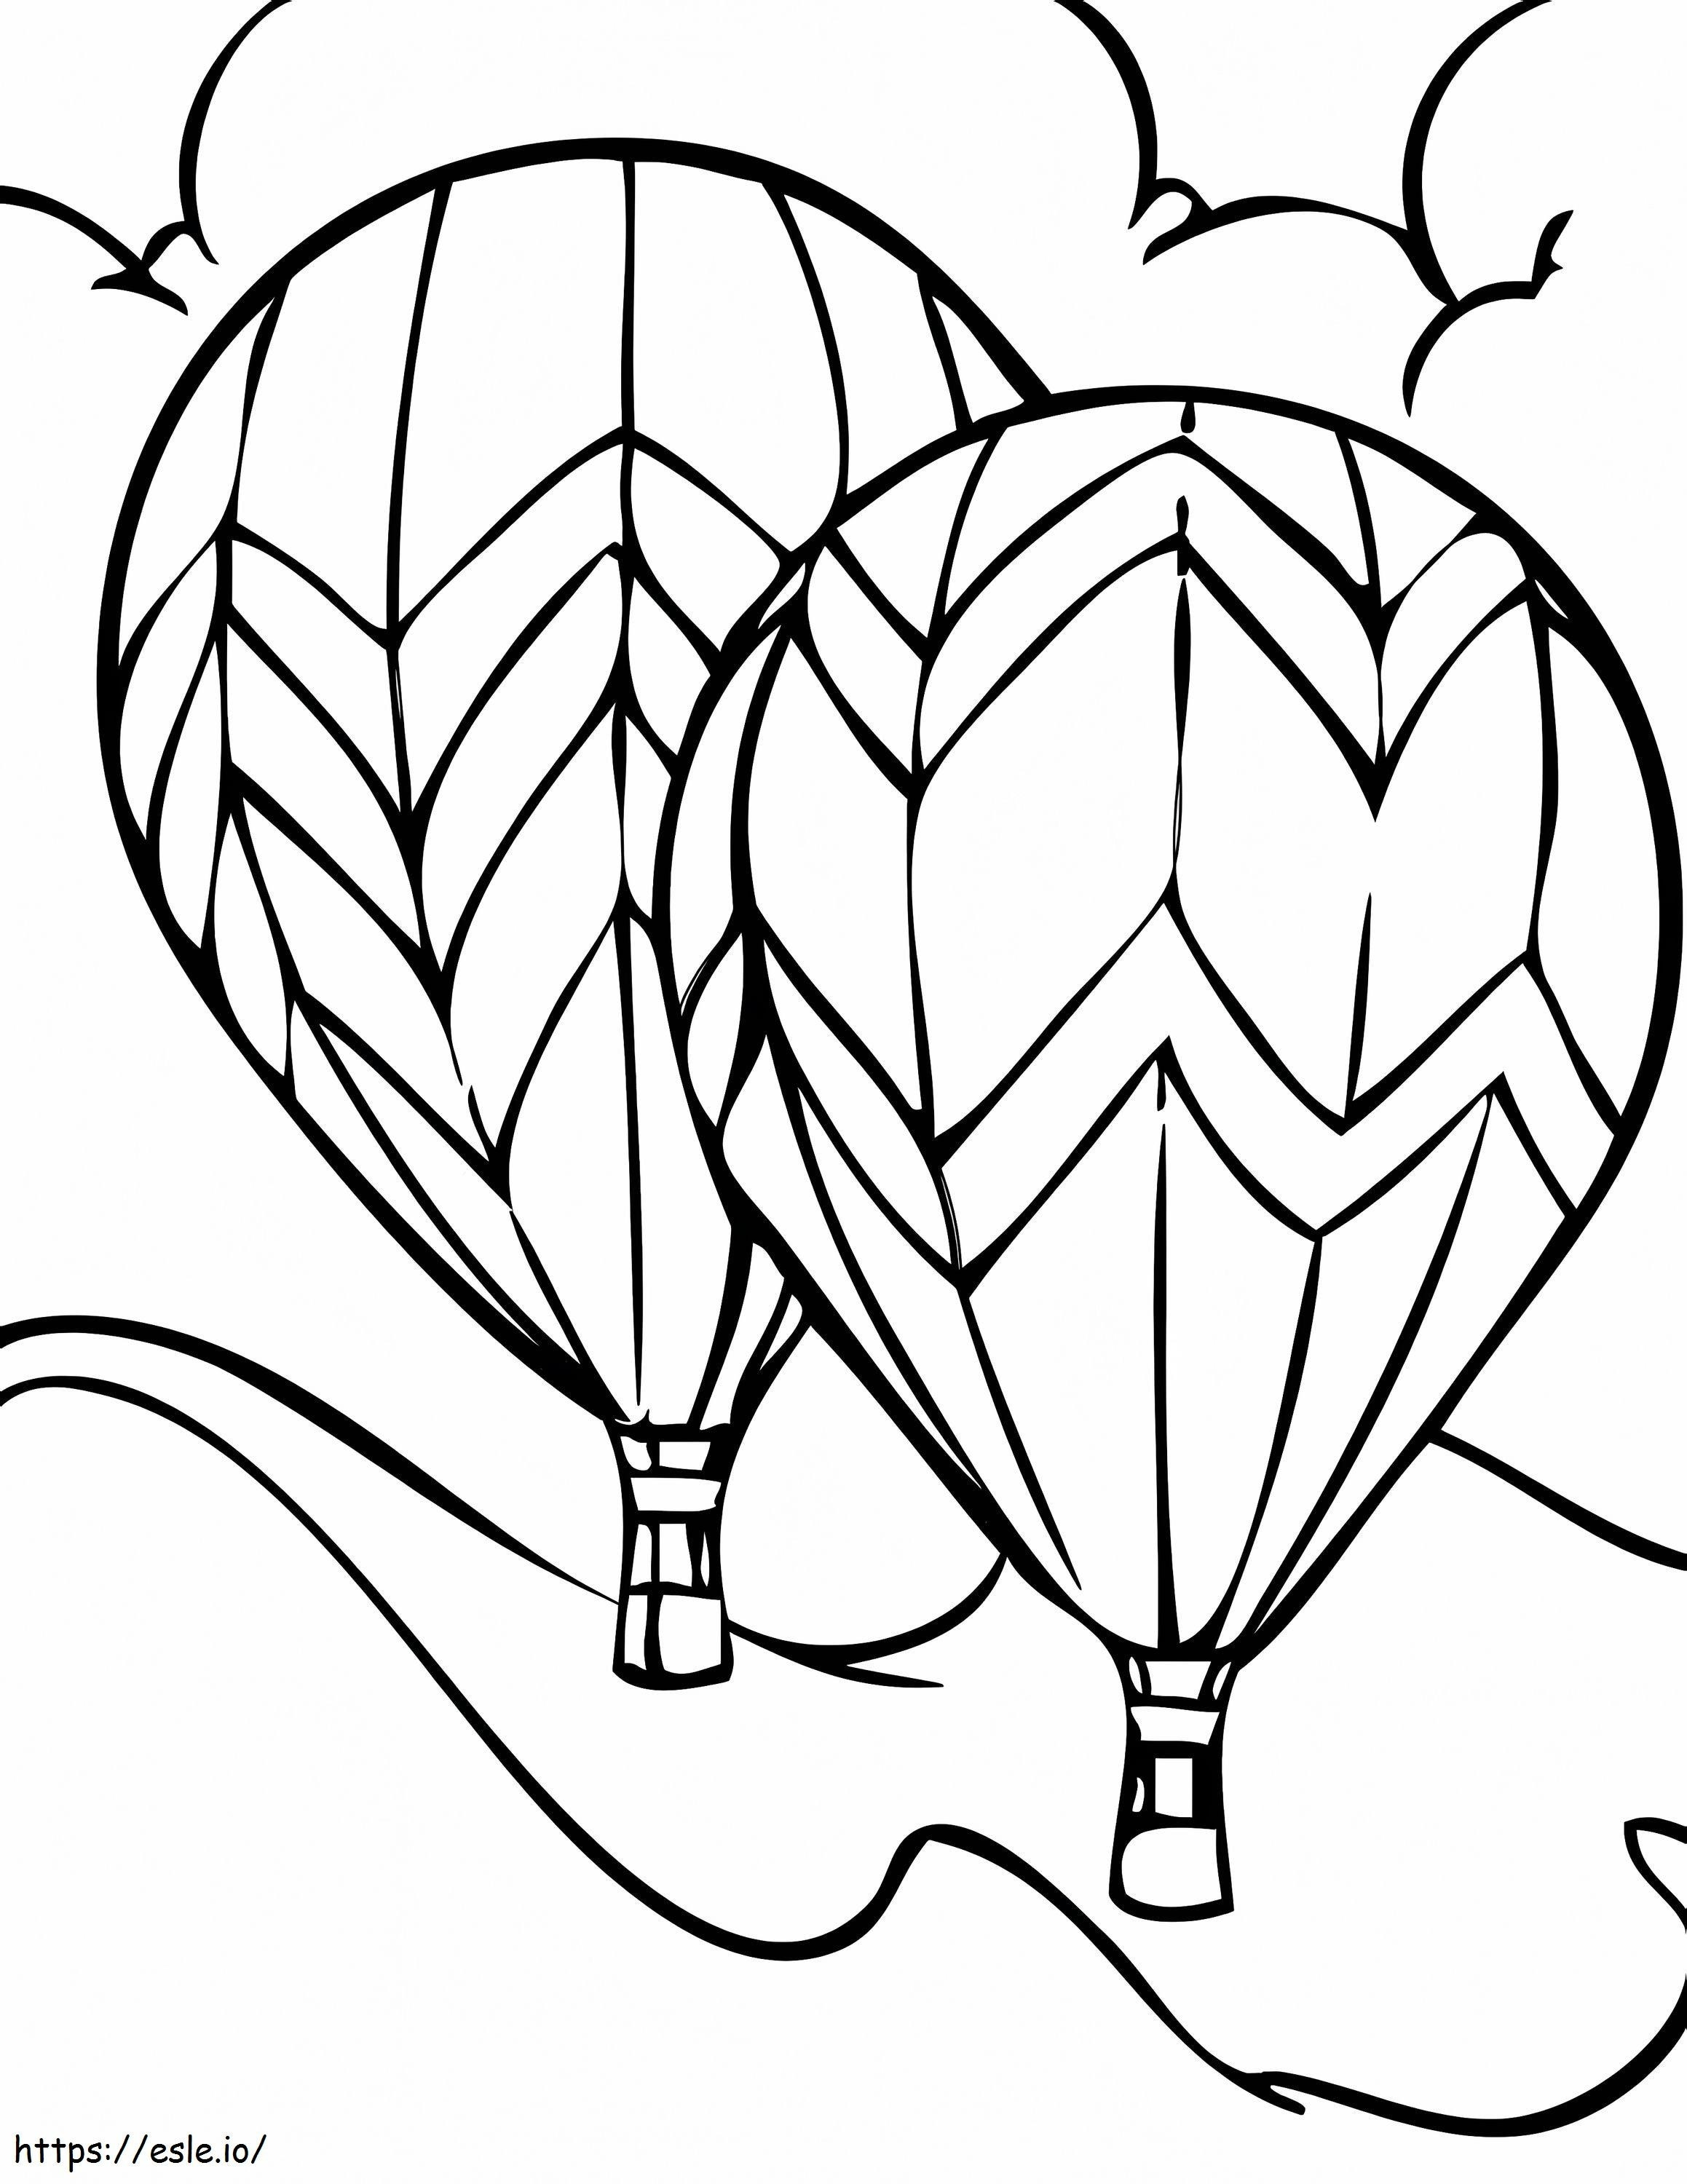 Two Hot Air Balloons coloring page